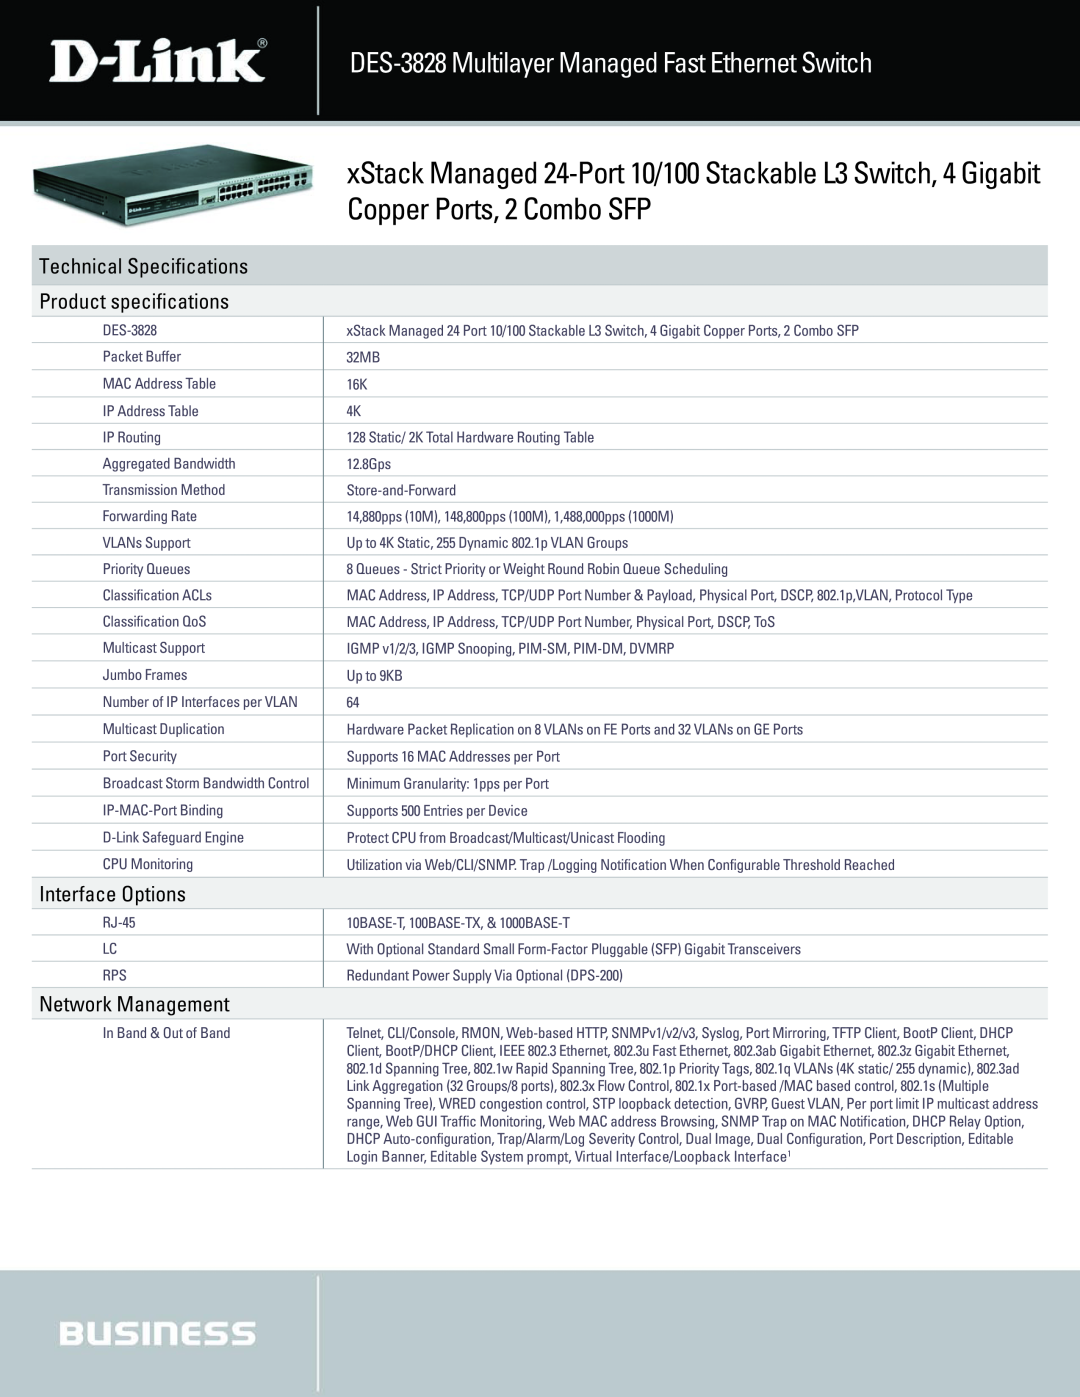 D-Link DES-3828 manual Technical Specifications Product specifications, Interface Options, Network Management 